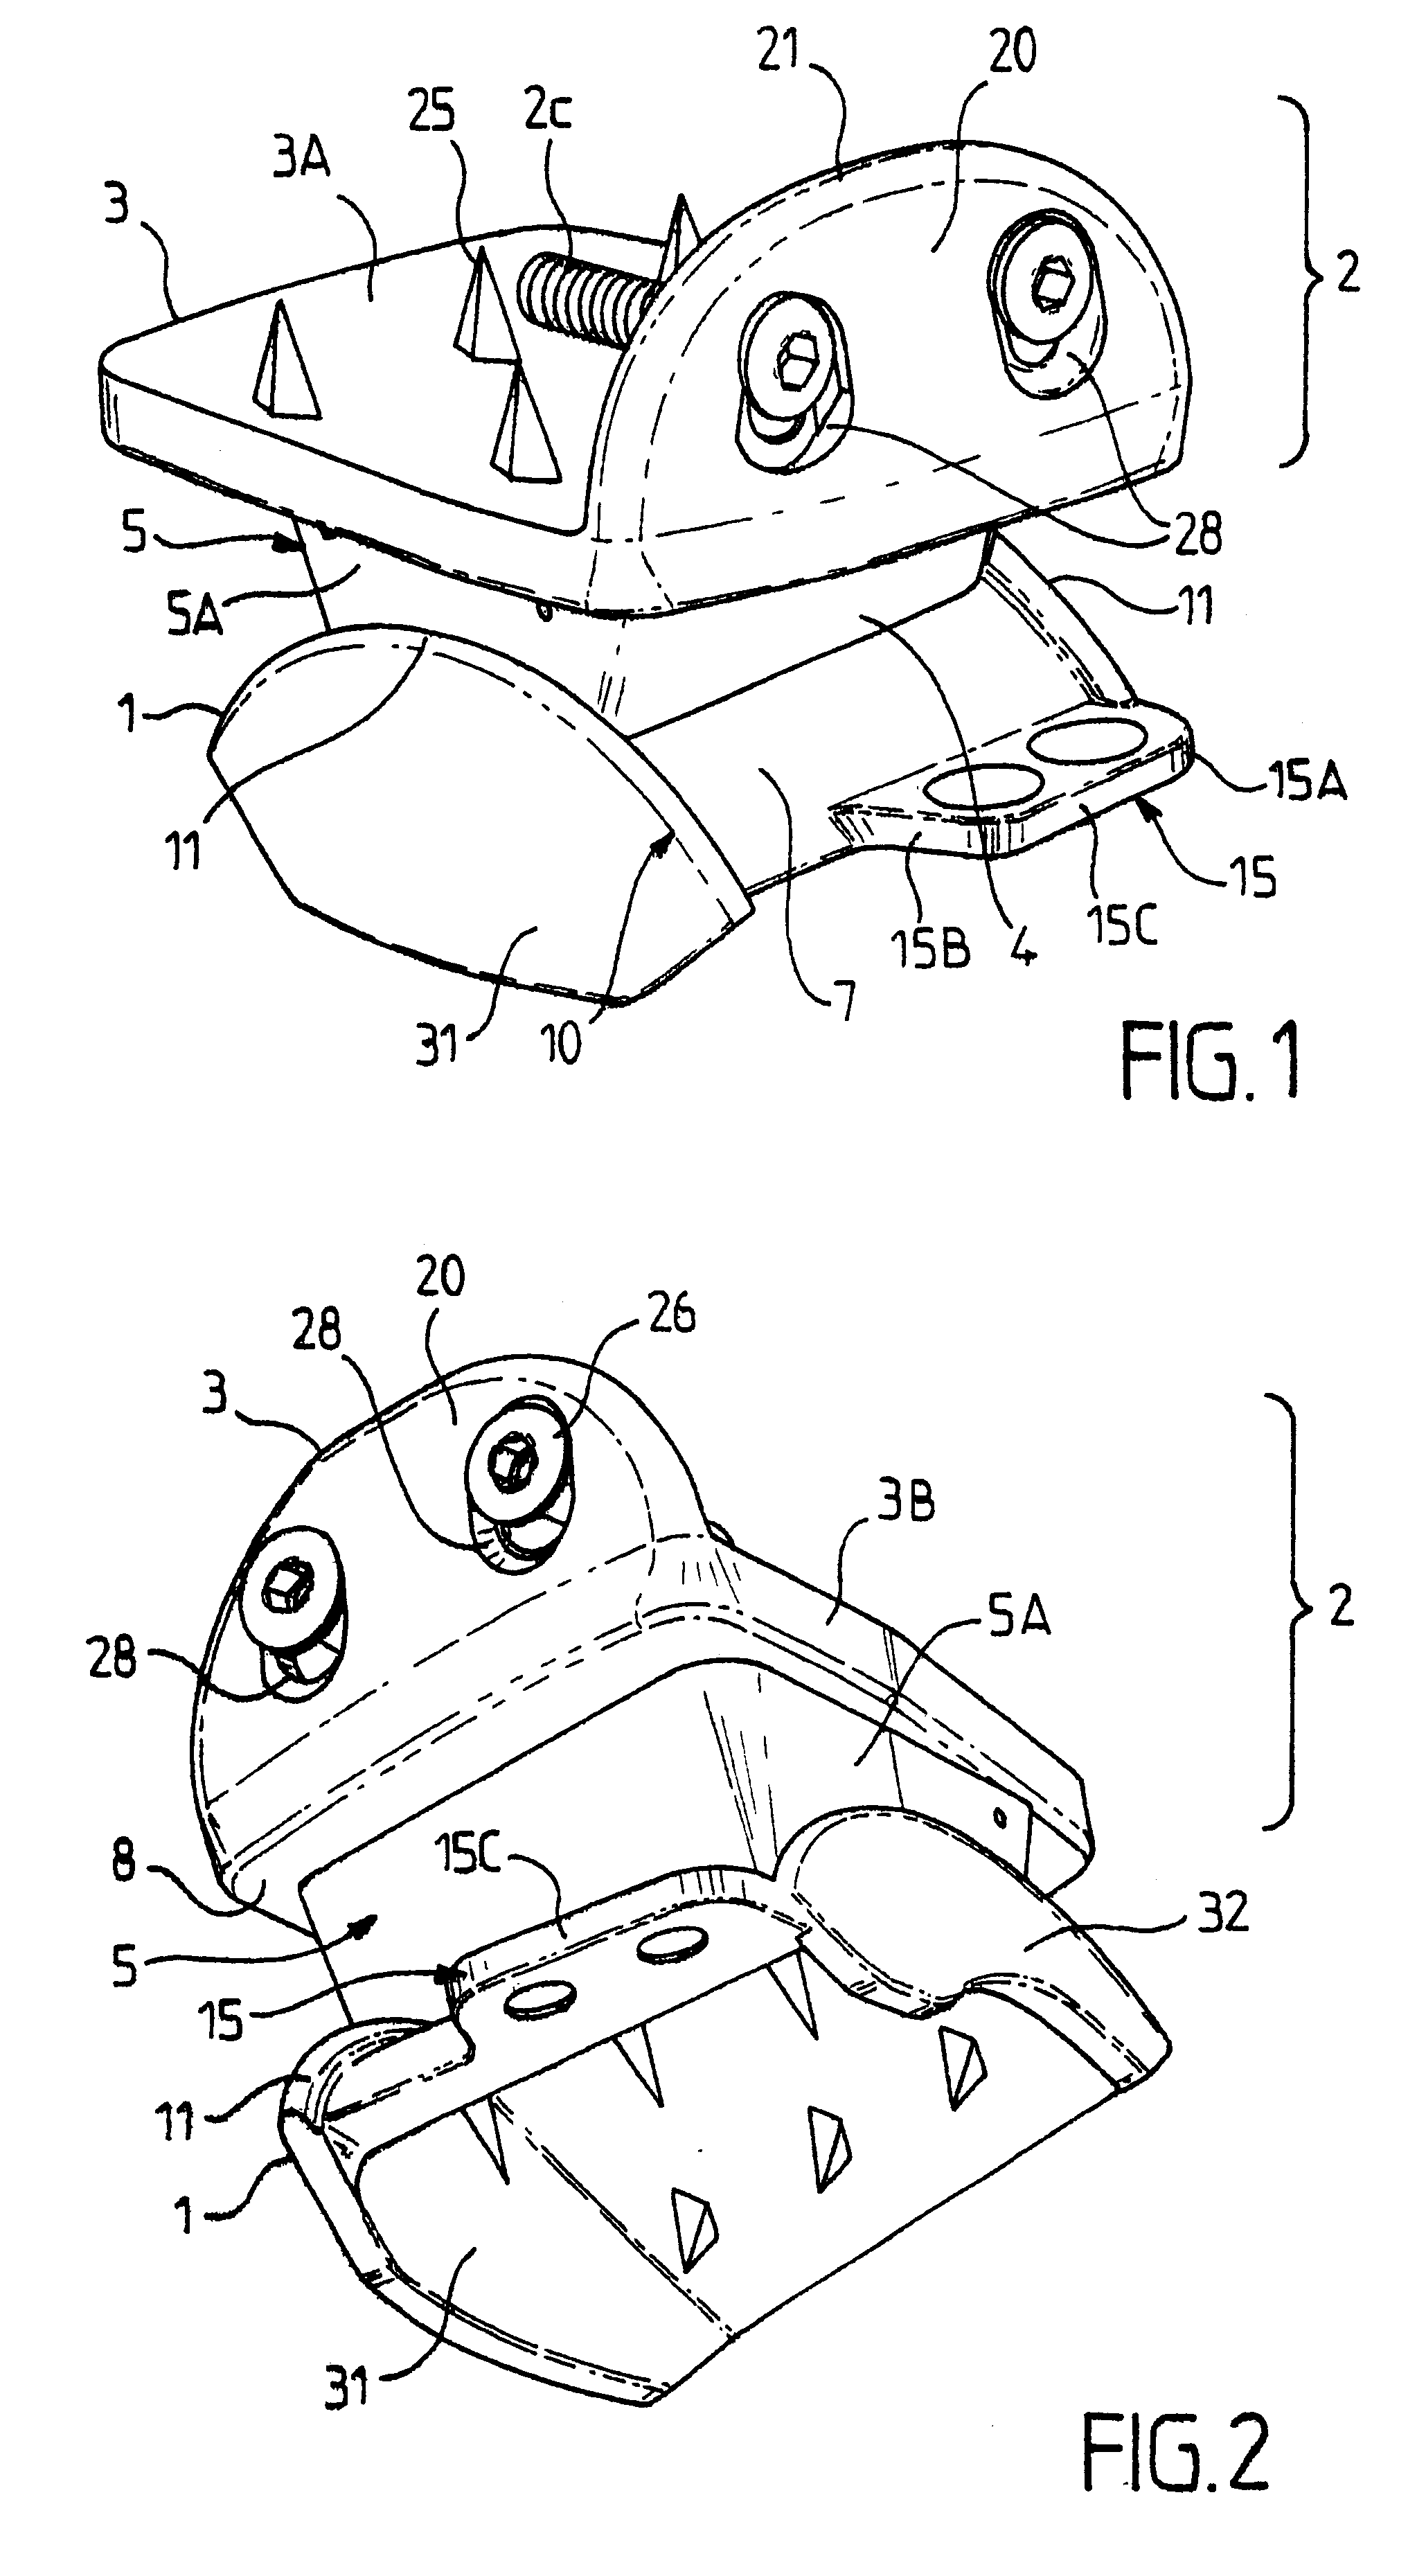 Ankle prosthesis